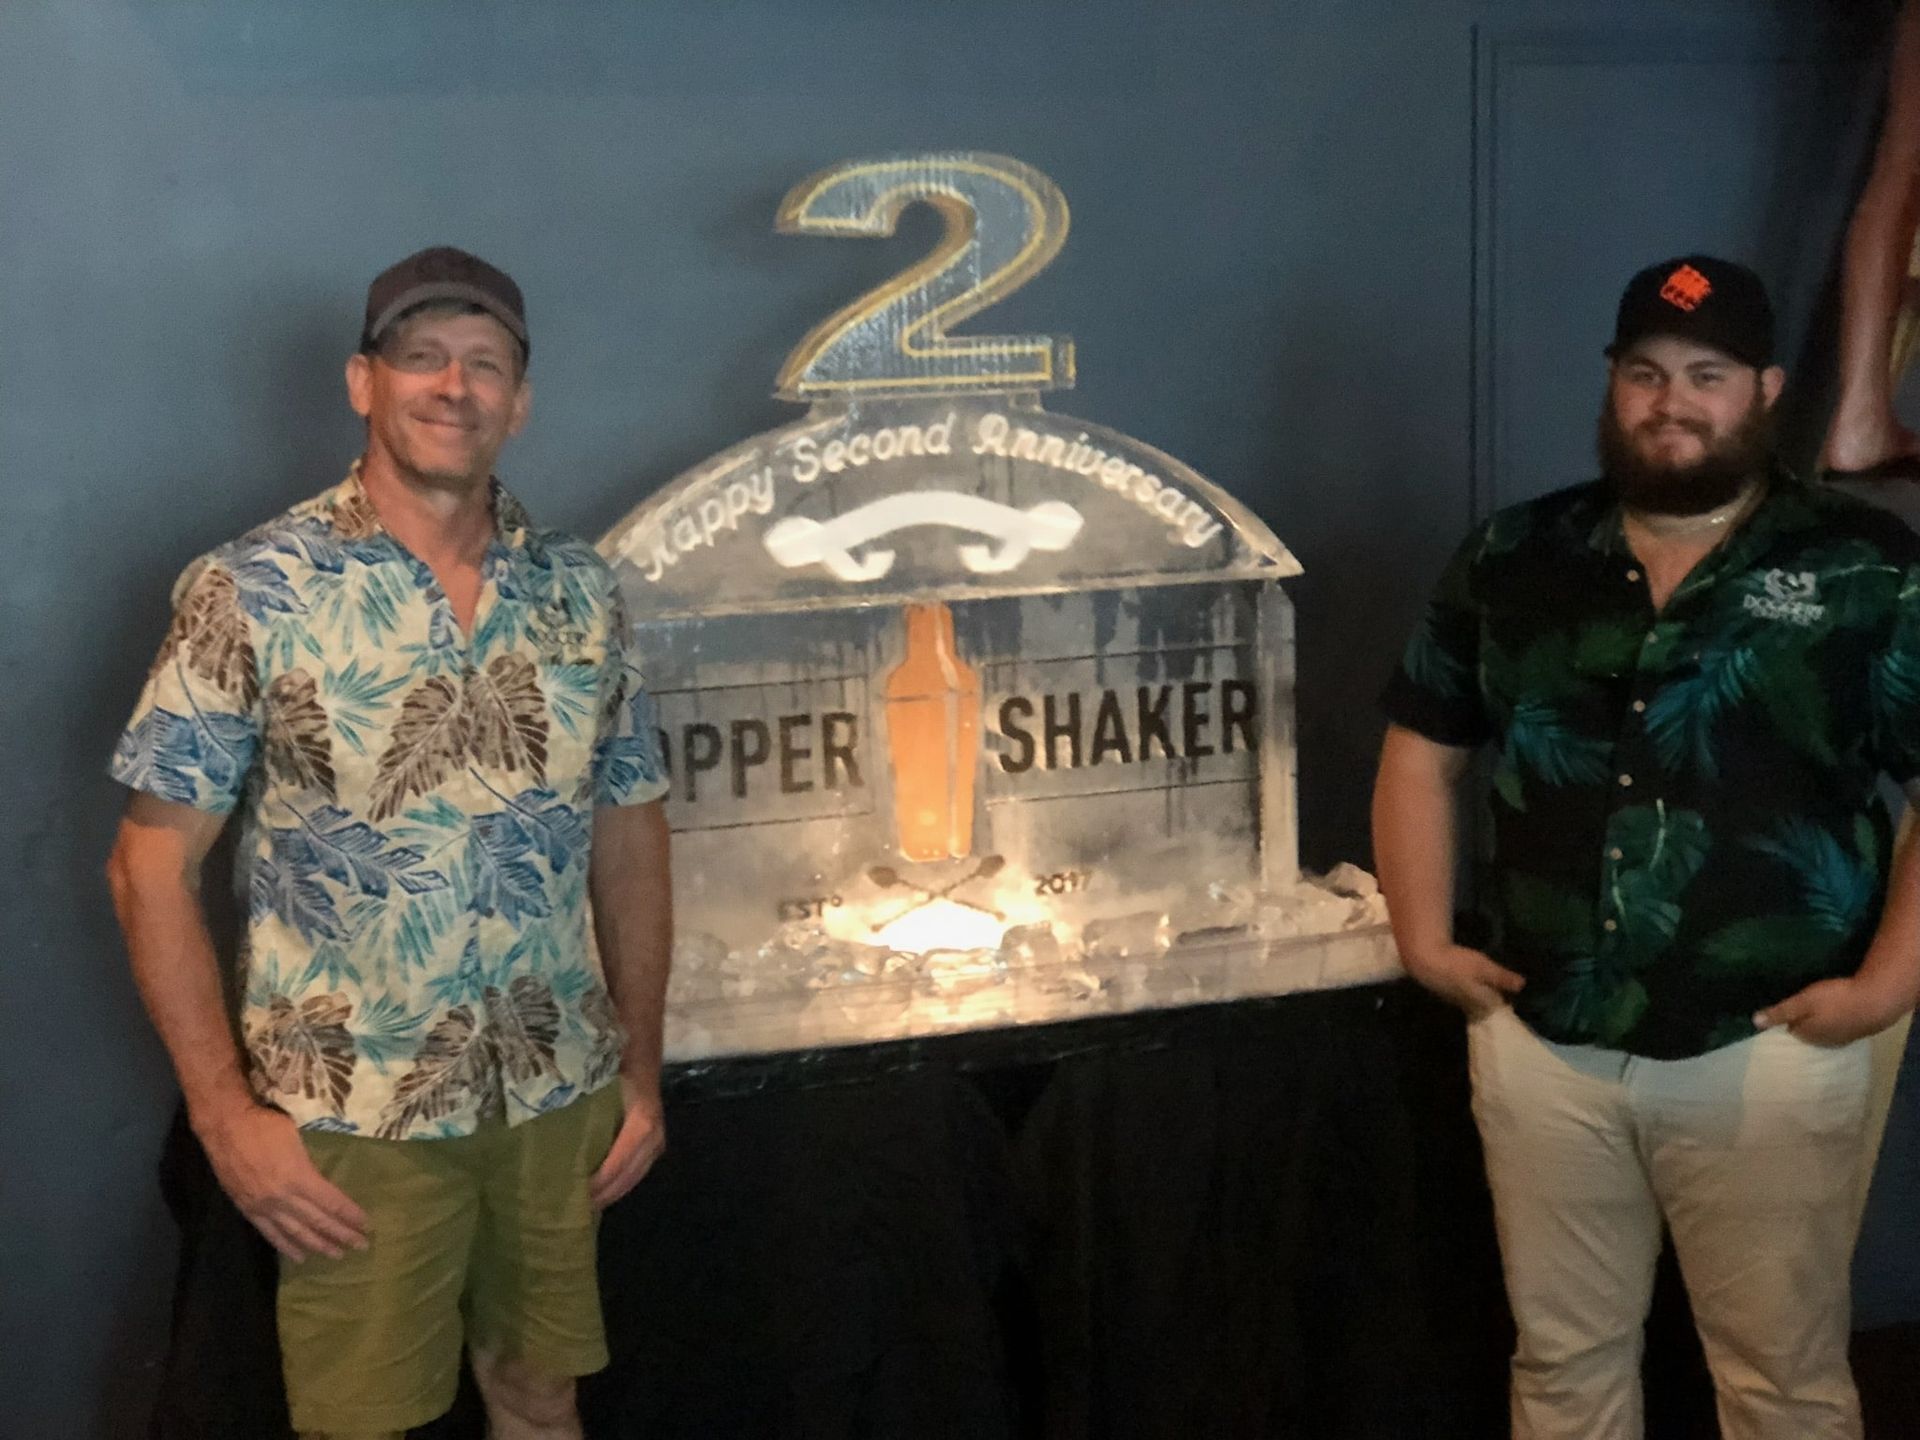 Two Men Standing in front of an Ice Sculpture that says Happy Second Anniversary